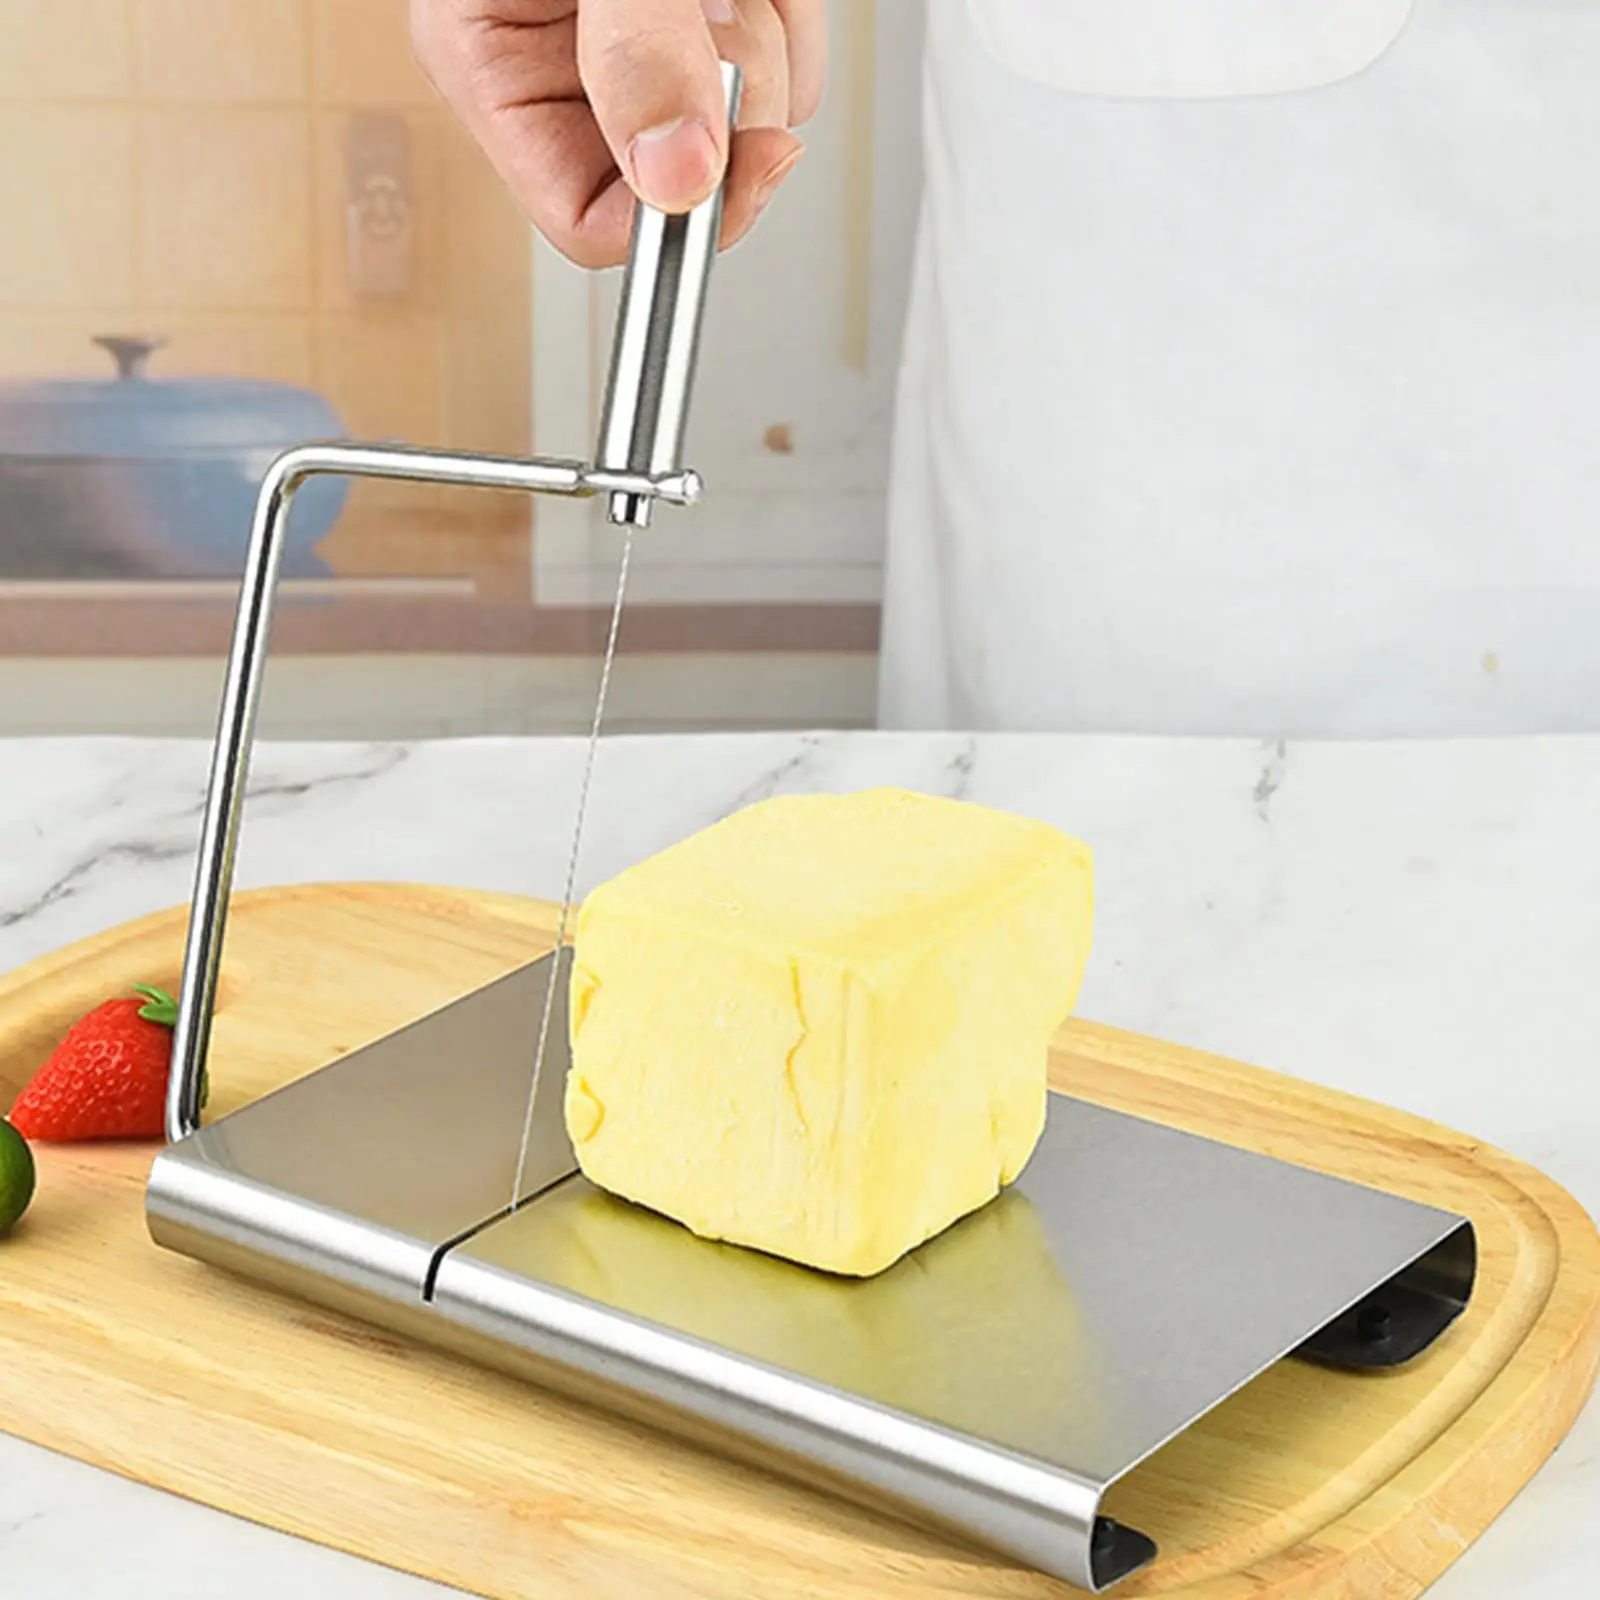 Cheese Slicer Replacement Wires Cheese Block Slicer for Cafe Restaurant Bar